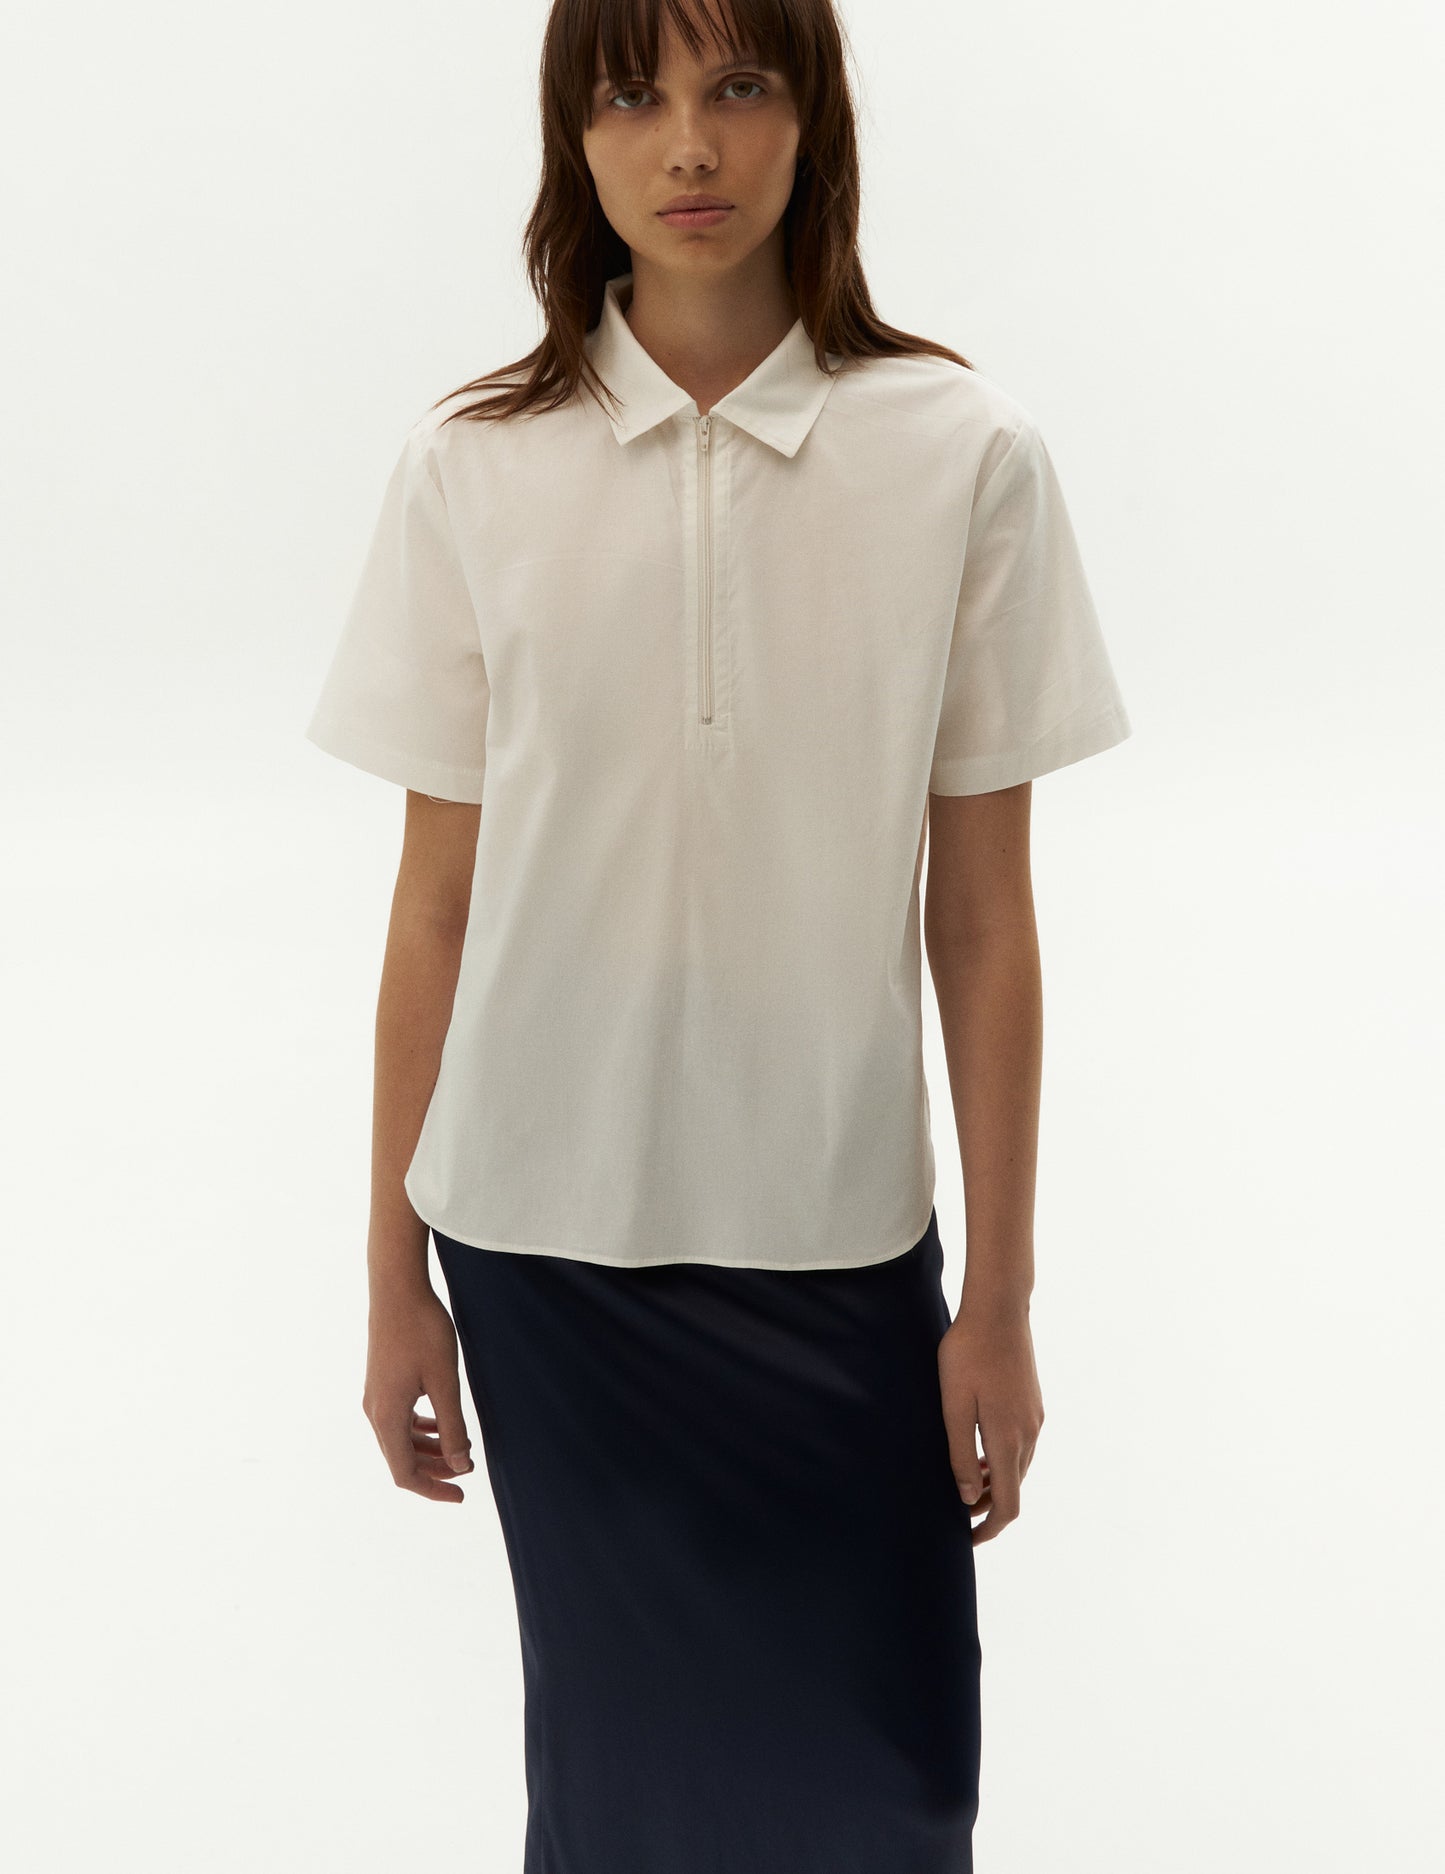 summer cotton polo in white color from FORMA brand, shop online. White women's polo